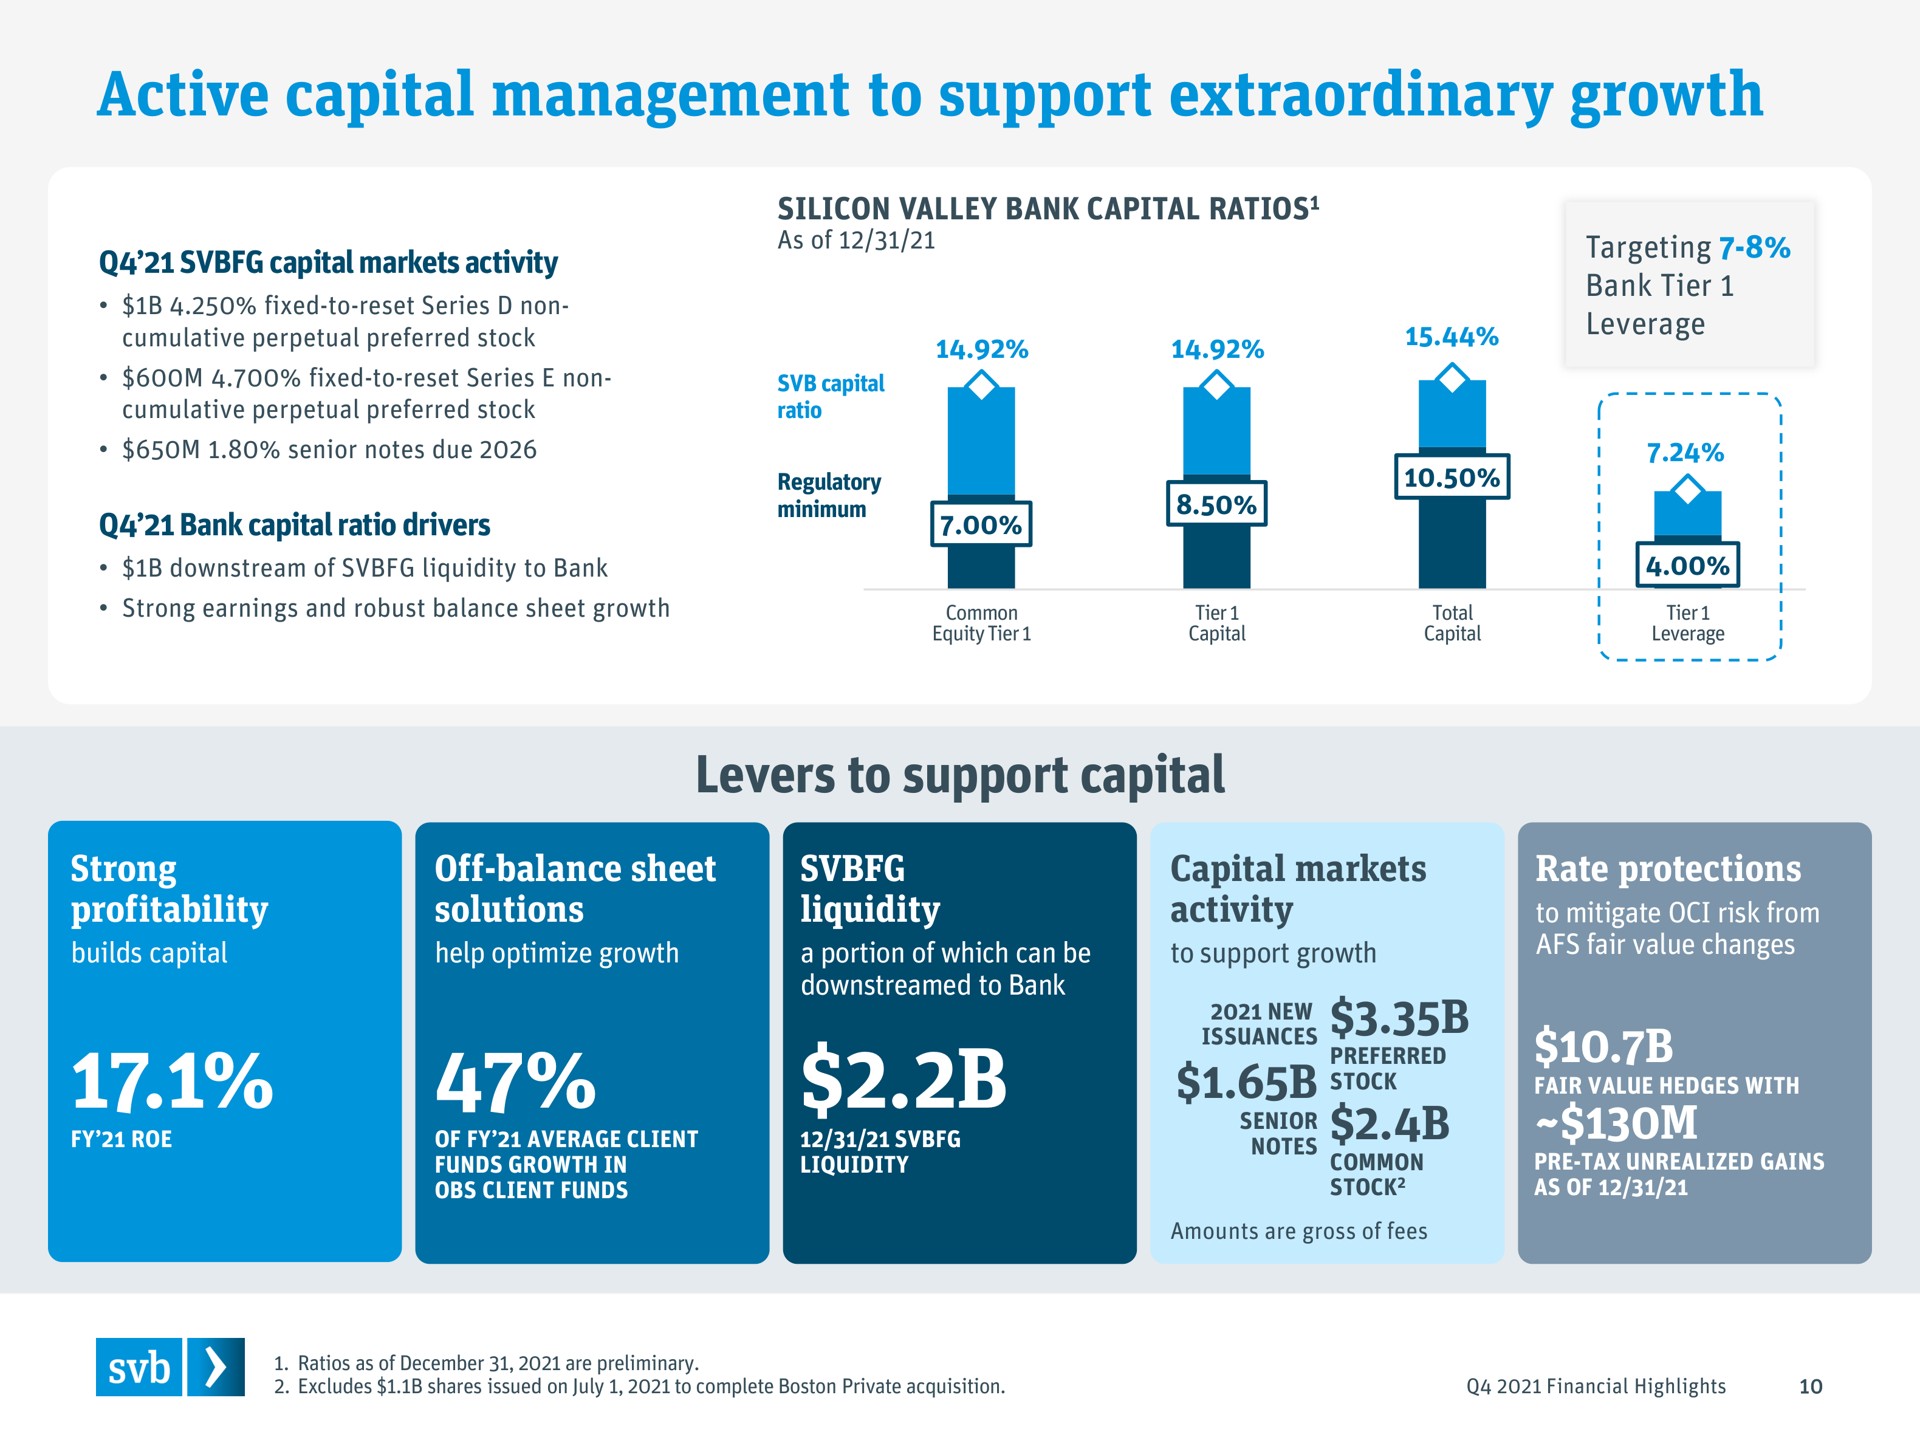 active capital management to support extraordinary growth levers to support capital issuances | Silicon Valley Bank